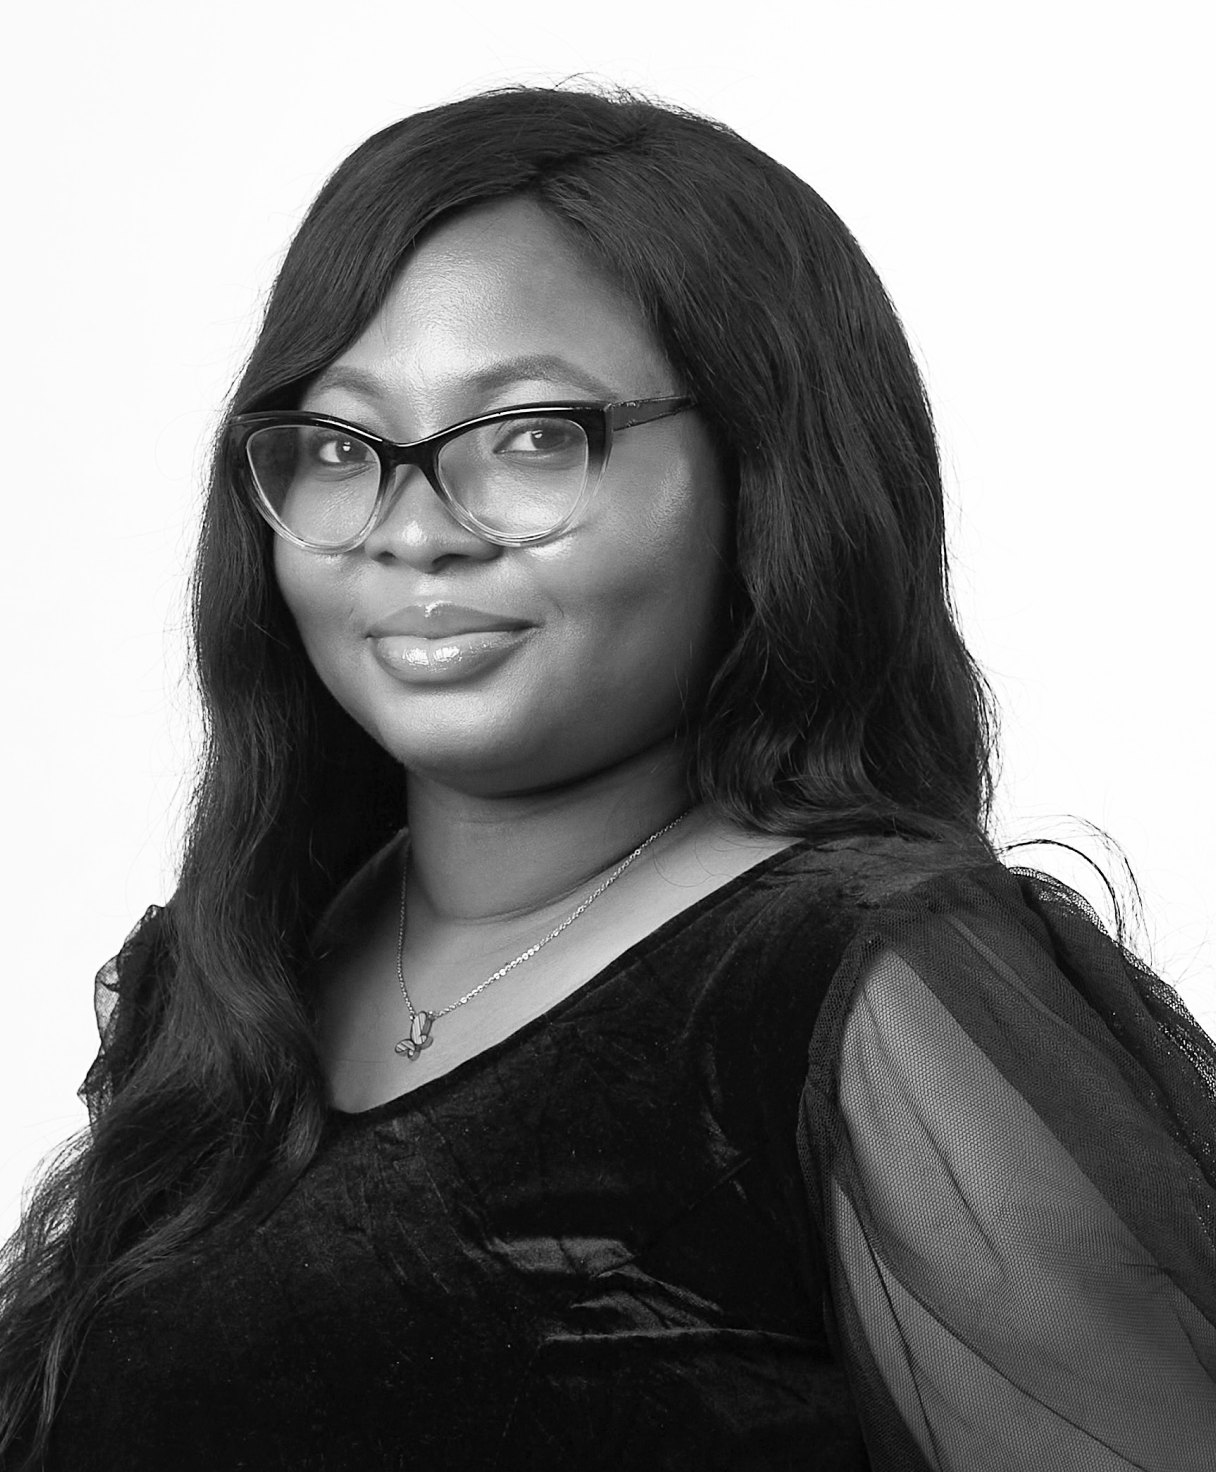 Black and white portrait of FOLASHADE WILLIAMS as part of the Oshinowo Studio team picture